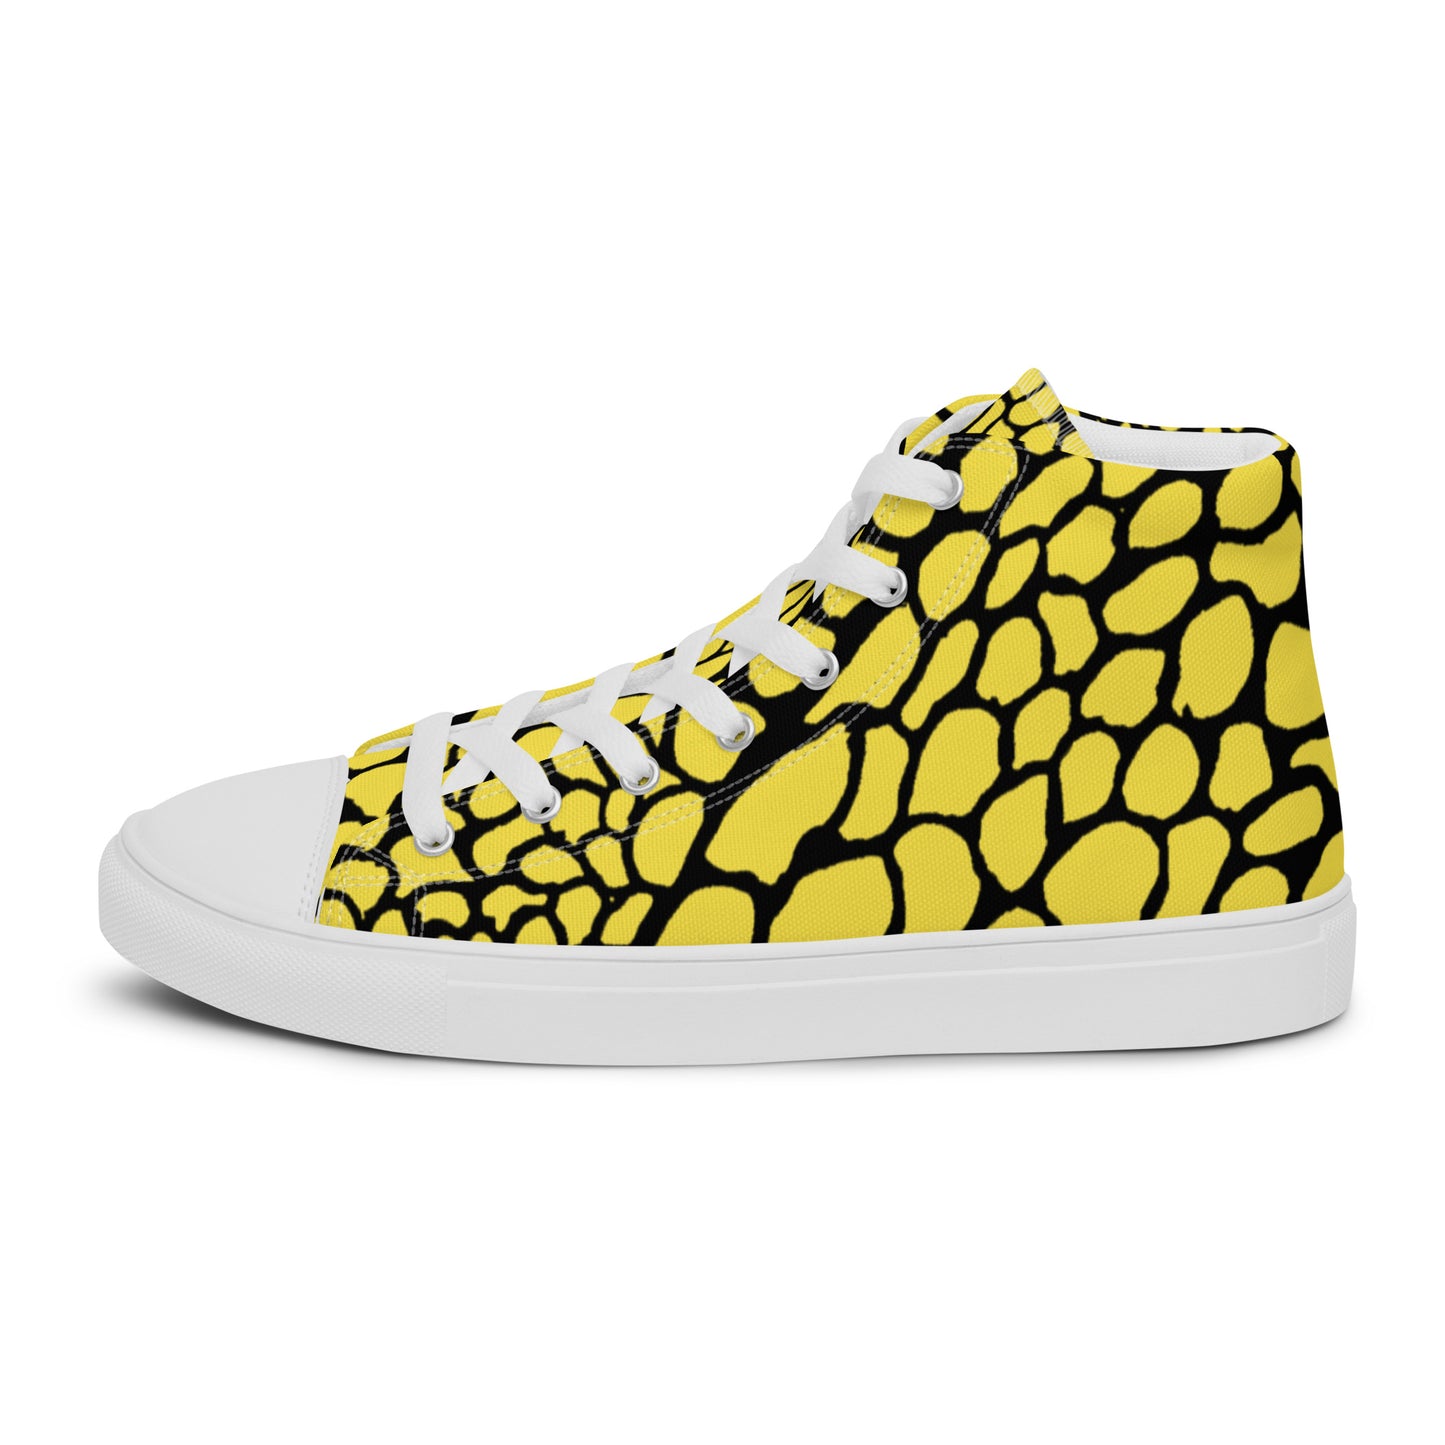 Organic Paris Daisy Yellow Print Women’s High Top Canvas Shoes | Casual Print Shoes | Stylish Festival Sneakers | Abstract Shoes | Lace Up Sneakers | - Comfortable Culture - Shoes - Comfortable Culture